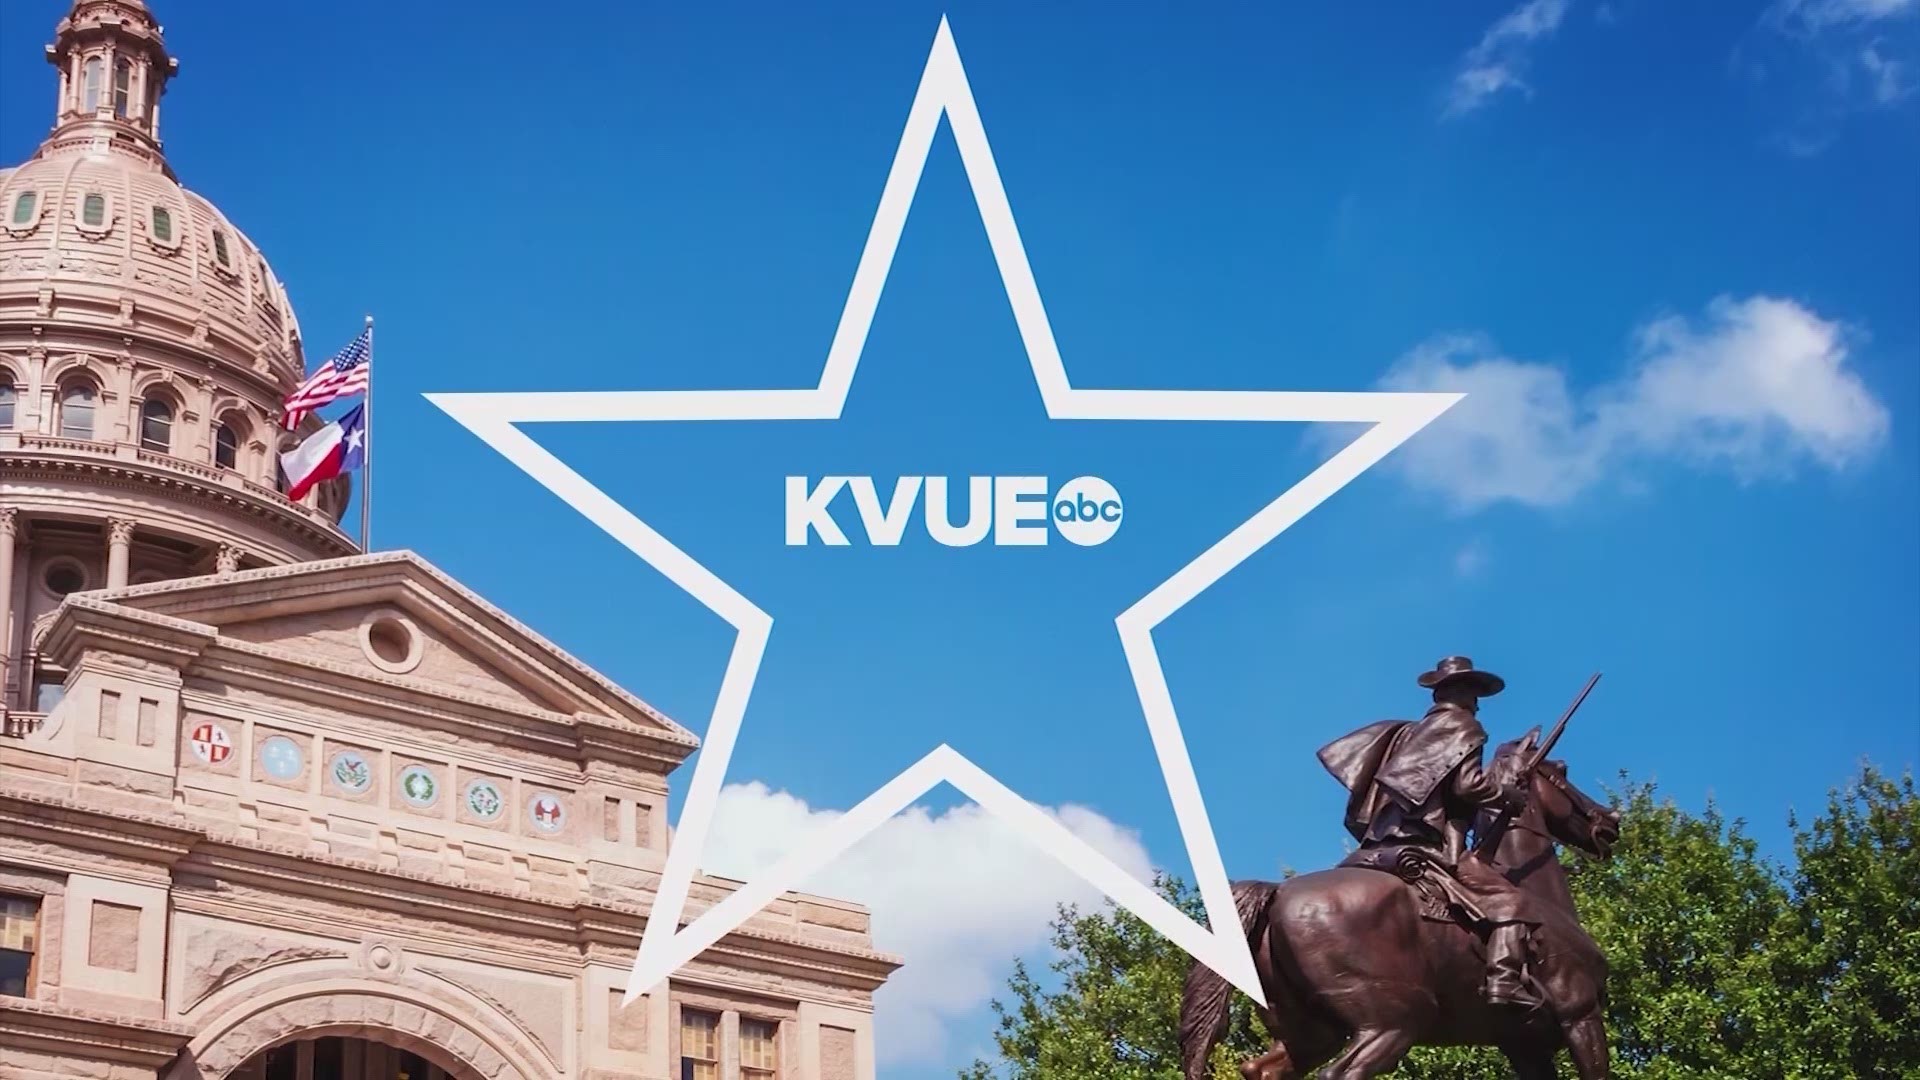 Chuck Lindell with the Austin American Statesman joined KVUE's Ashley Goudeau to discuss the latest lawsuit filed by the State of Texas against the City of Austin.